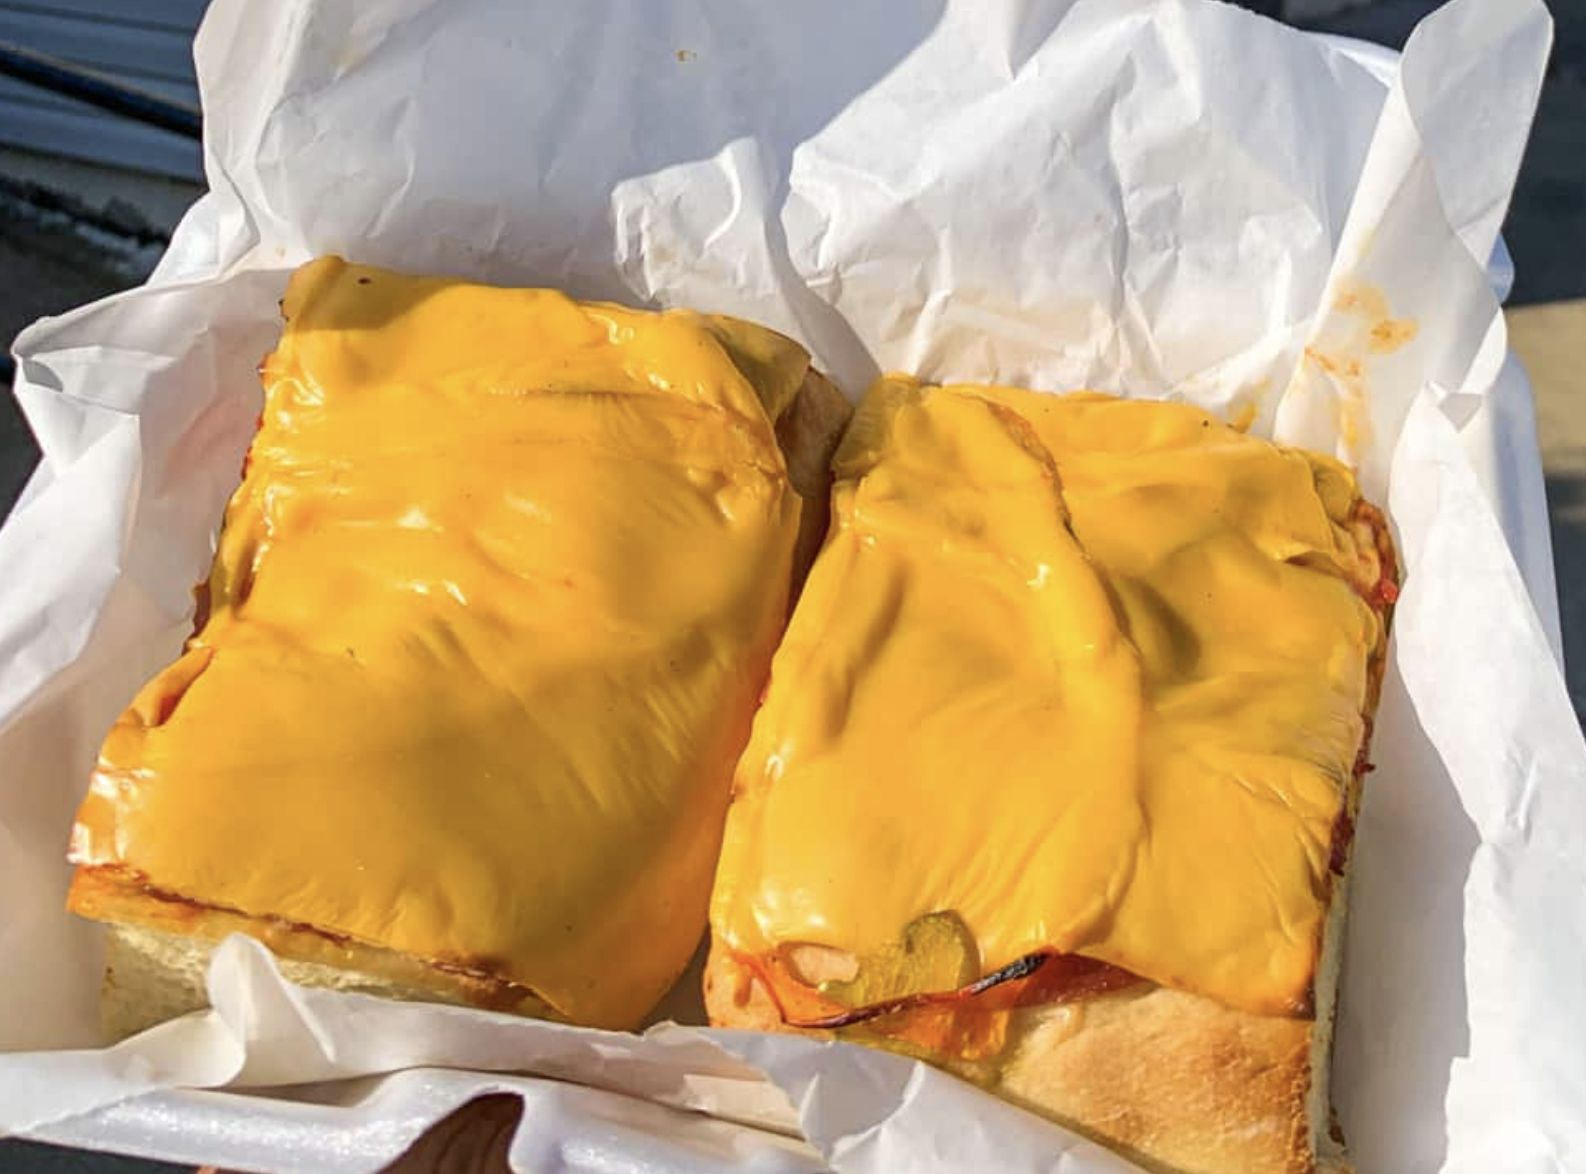 Pennsylvania pizza as a whole is not too bad, but it is home to Altoona style; which means draping your pizza with sliced American cheese. Italians around the world are rolling over in their graves.